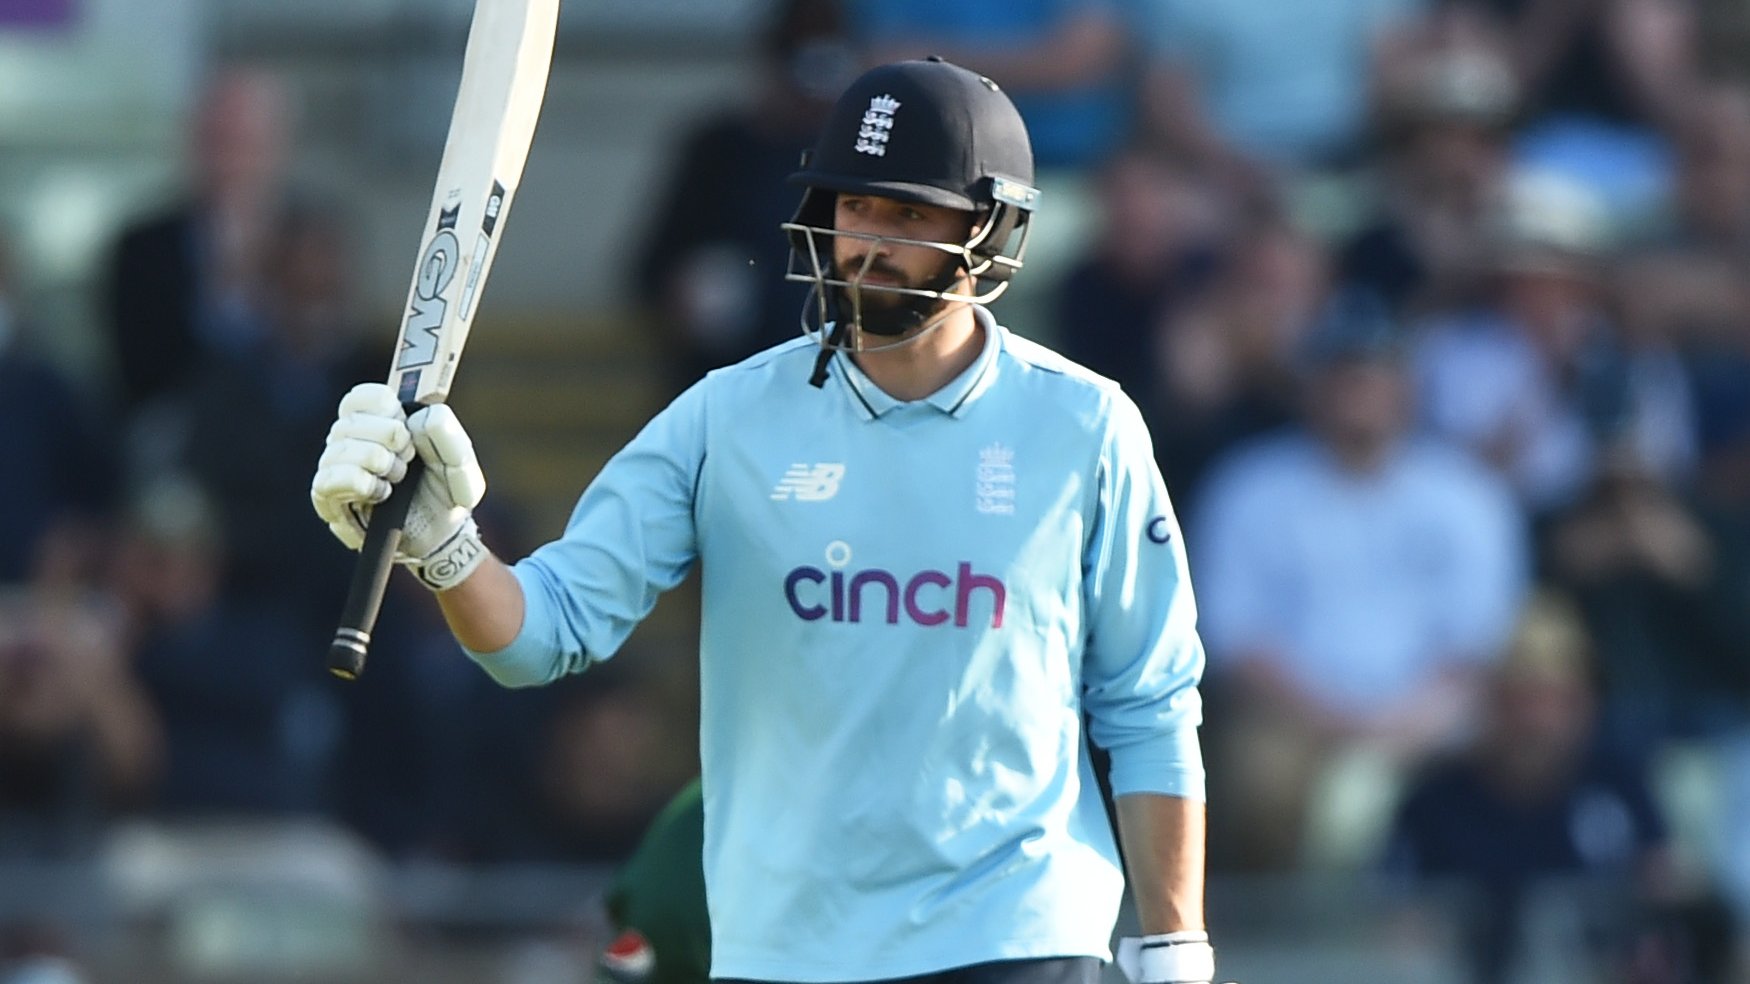 ENG vs PAK | A century was long-overdue but I’m not going to get my hopes up, says James Vince